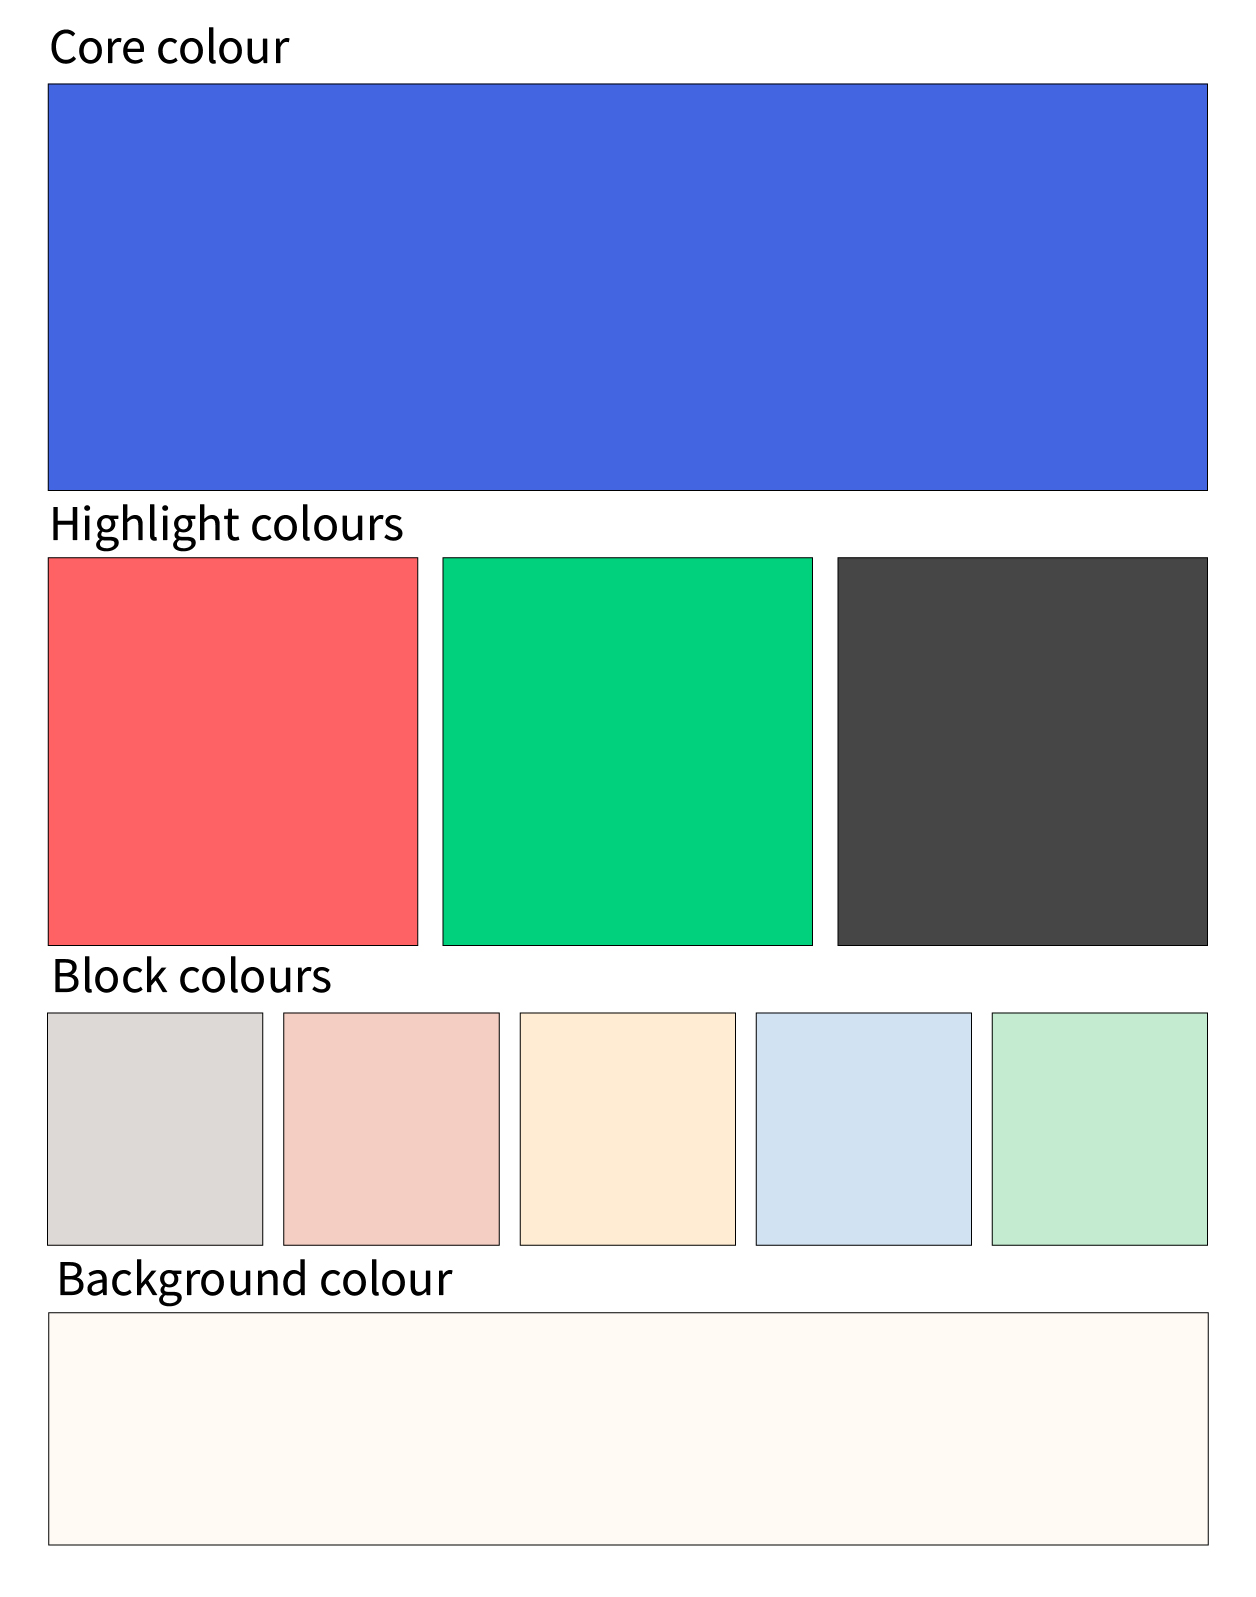 Image showing the colour palette used by the University of Dundee branding team